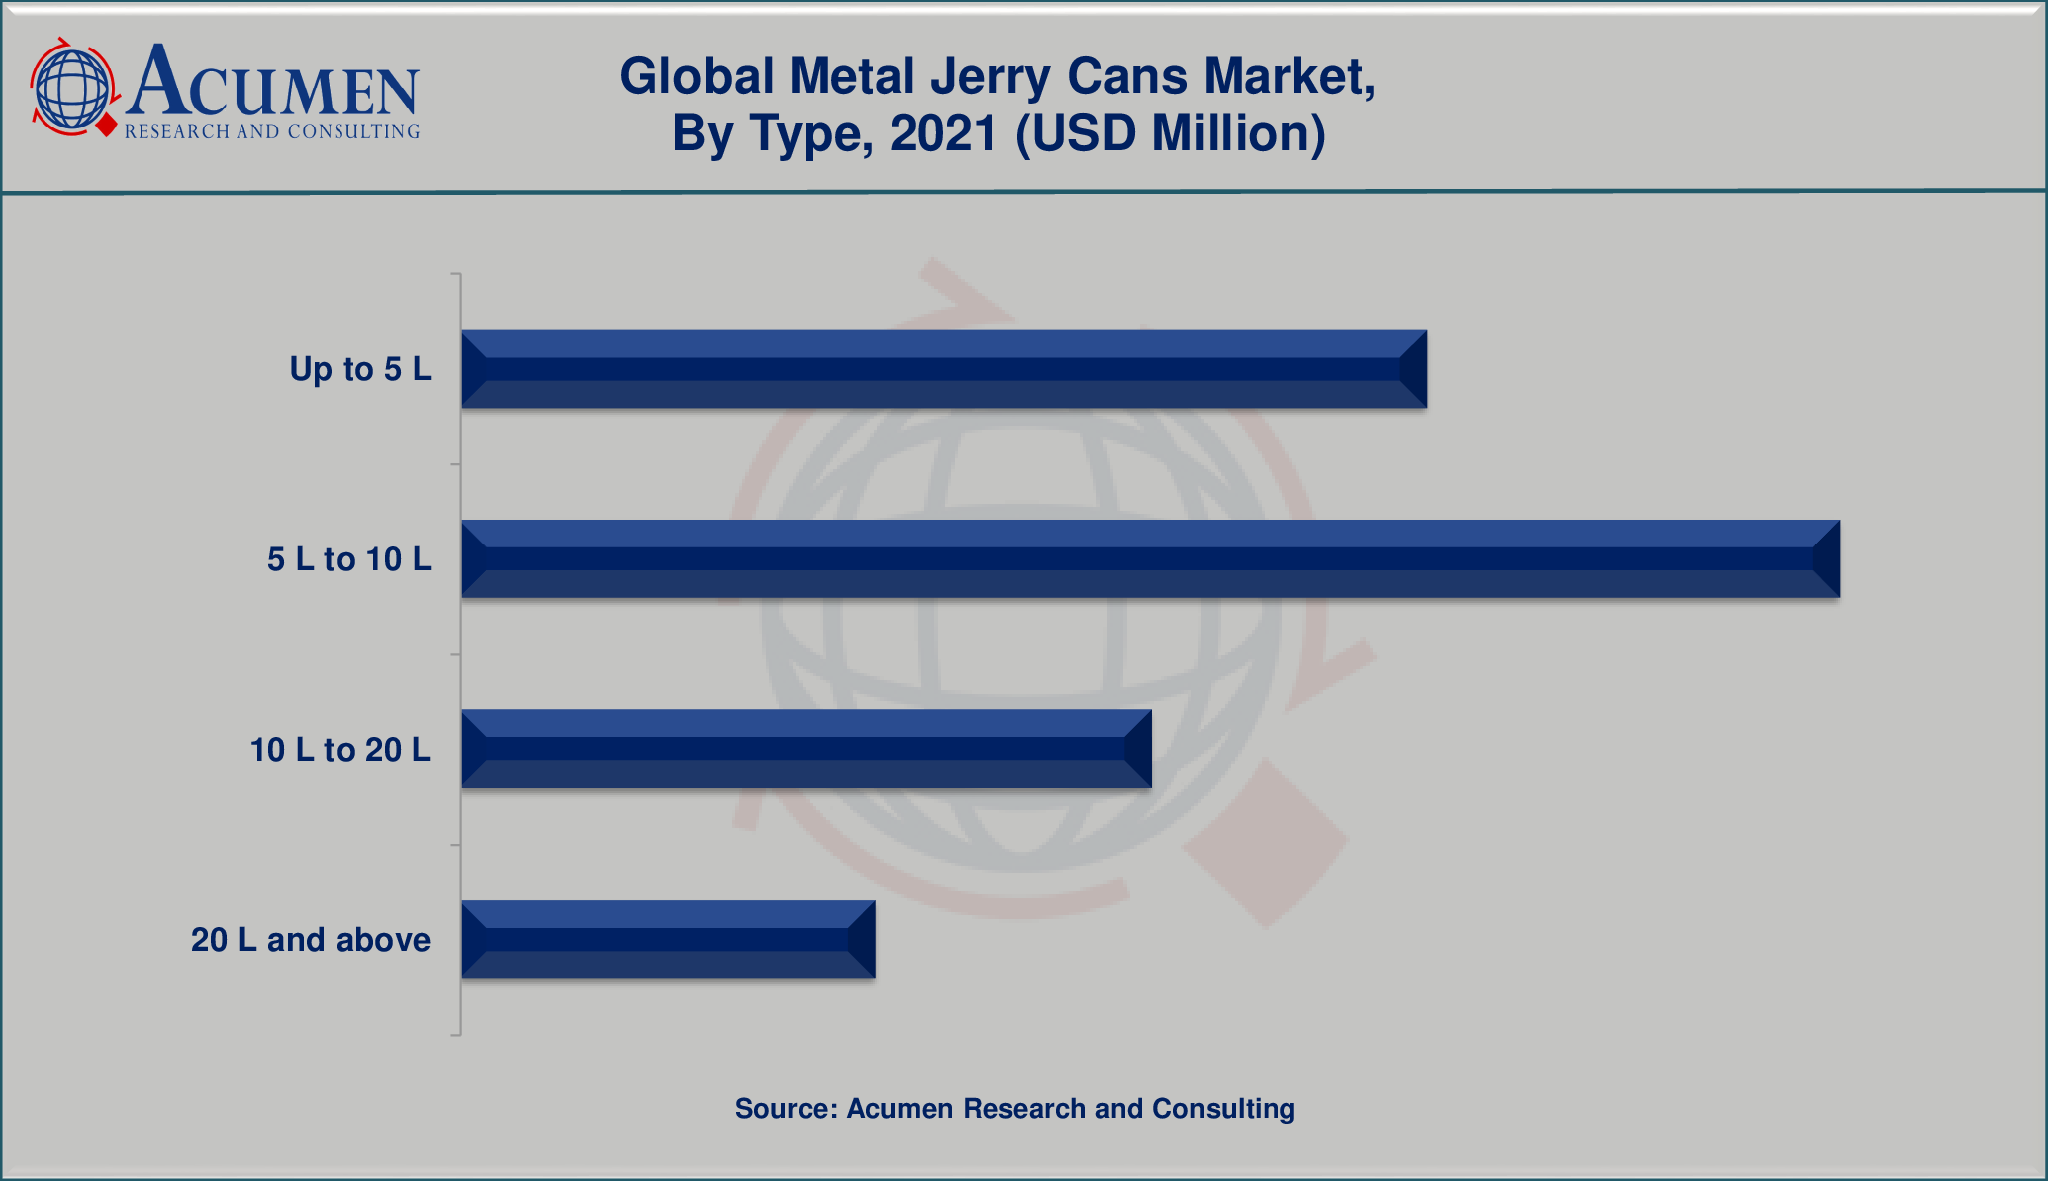 Metal Jerry Cans Market By Type will achieve a market size of USD 817 Million by 2030, budding at a CAGR of 4.5%